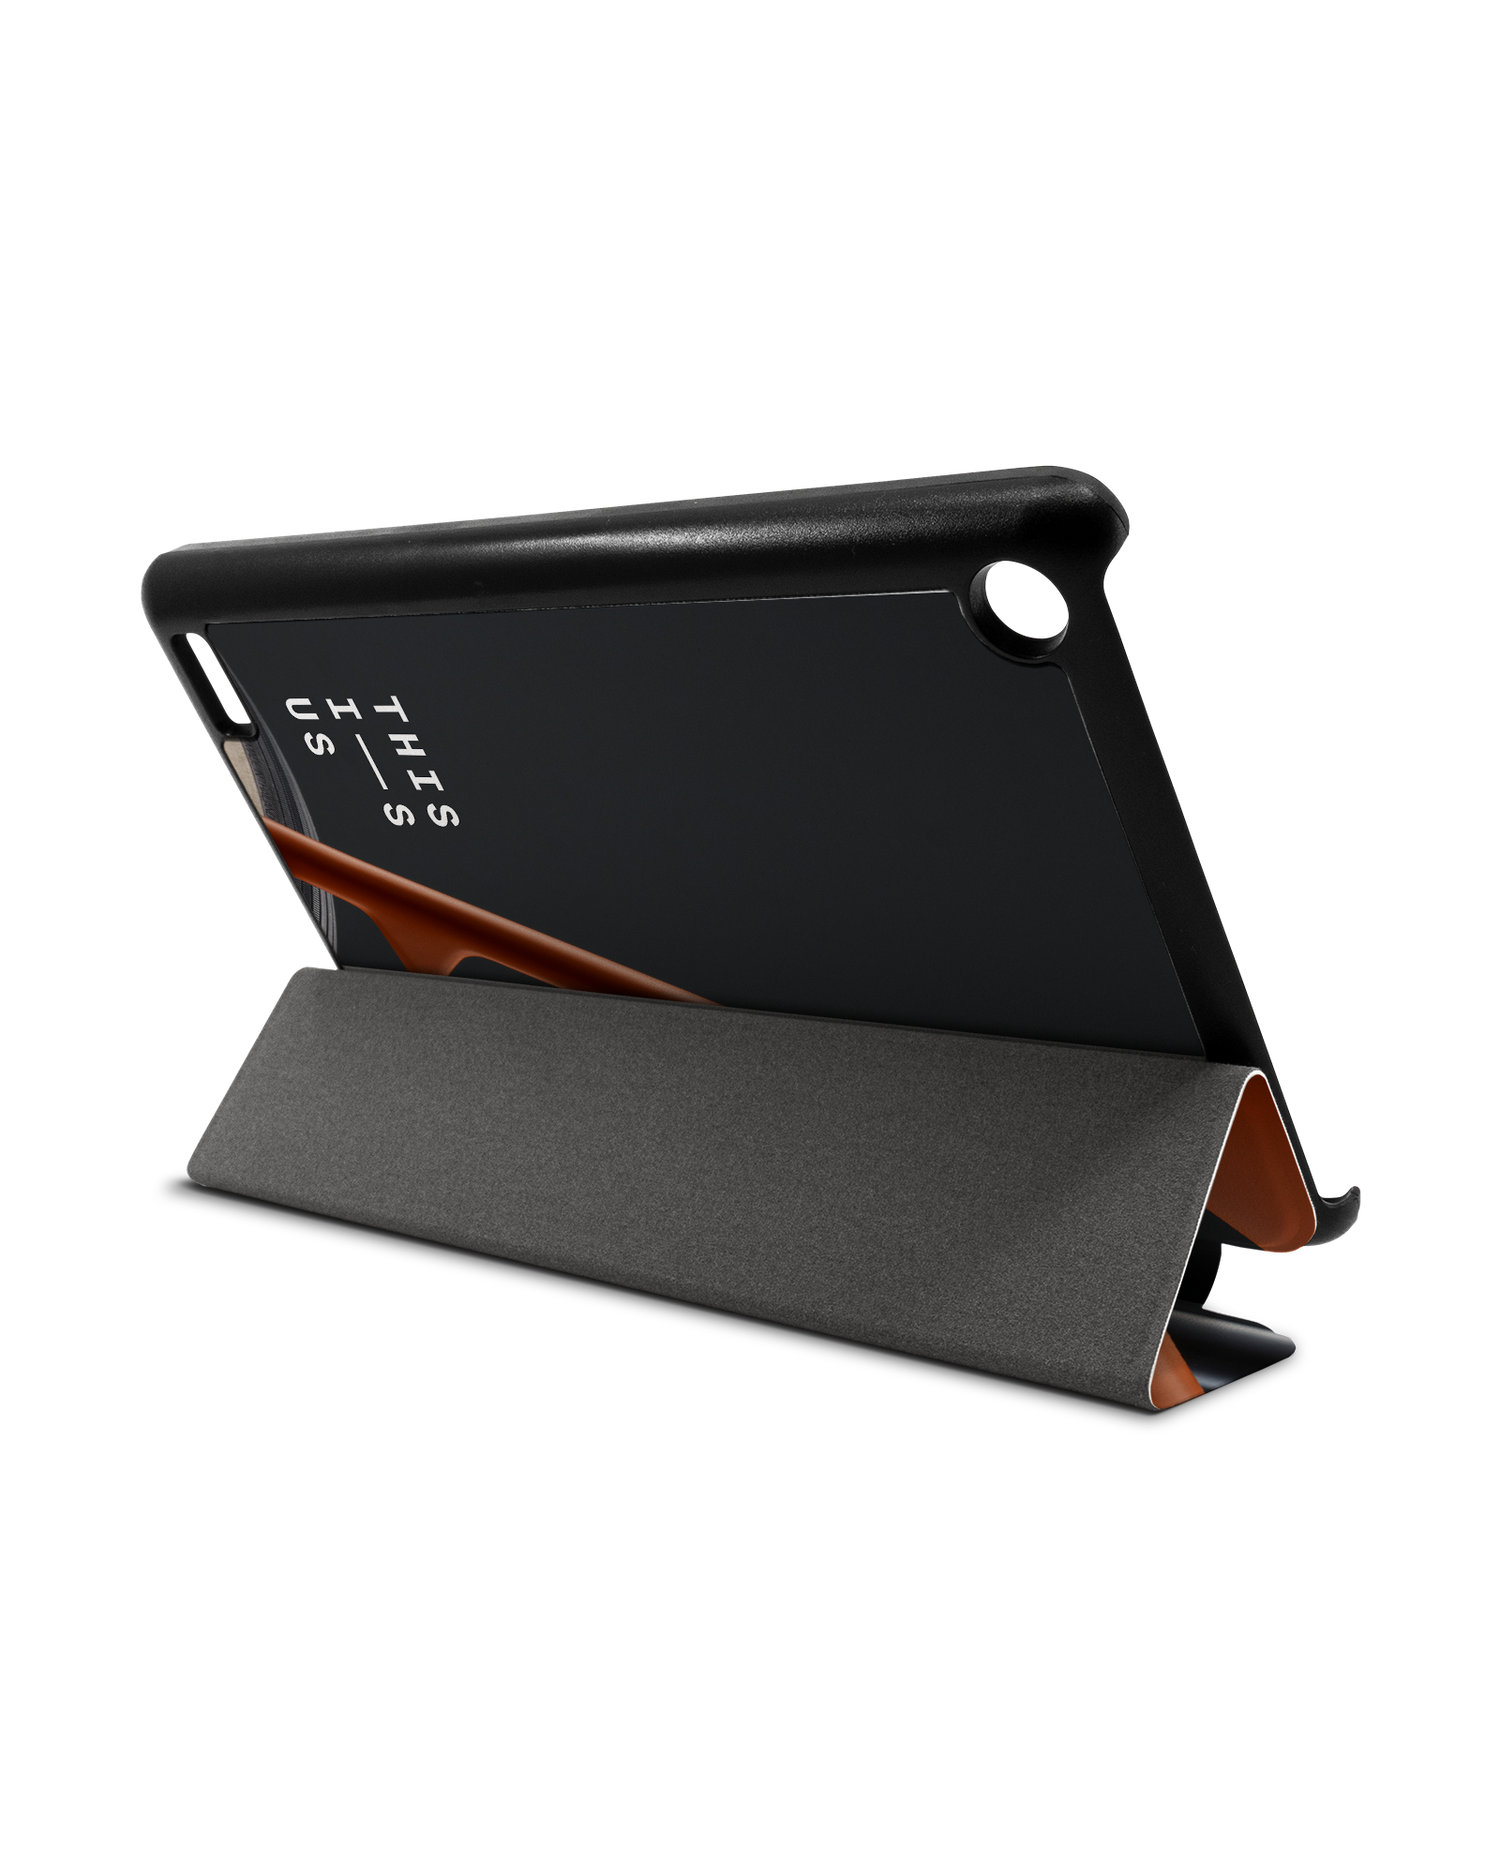 VRC Tablet Smart Case for Amazon Fire 7: Used as Stand